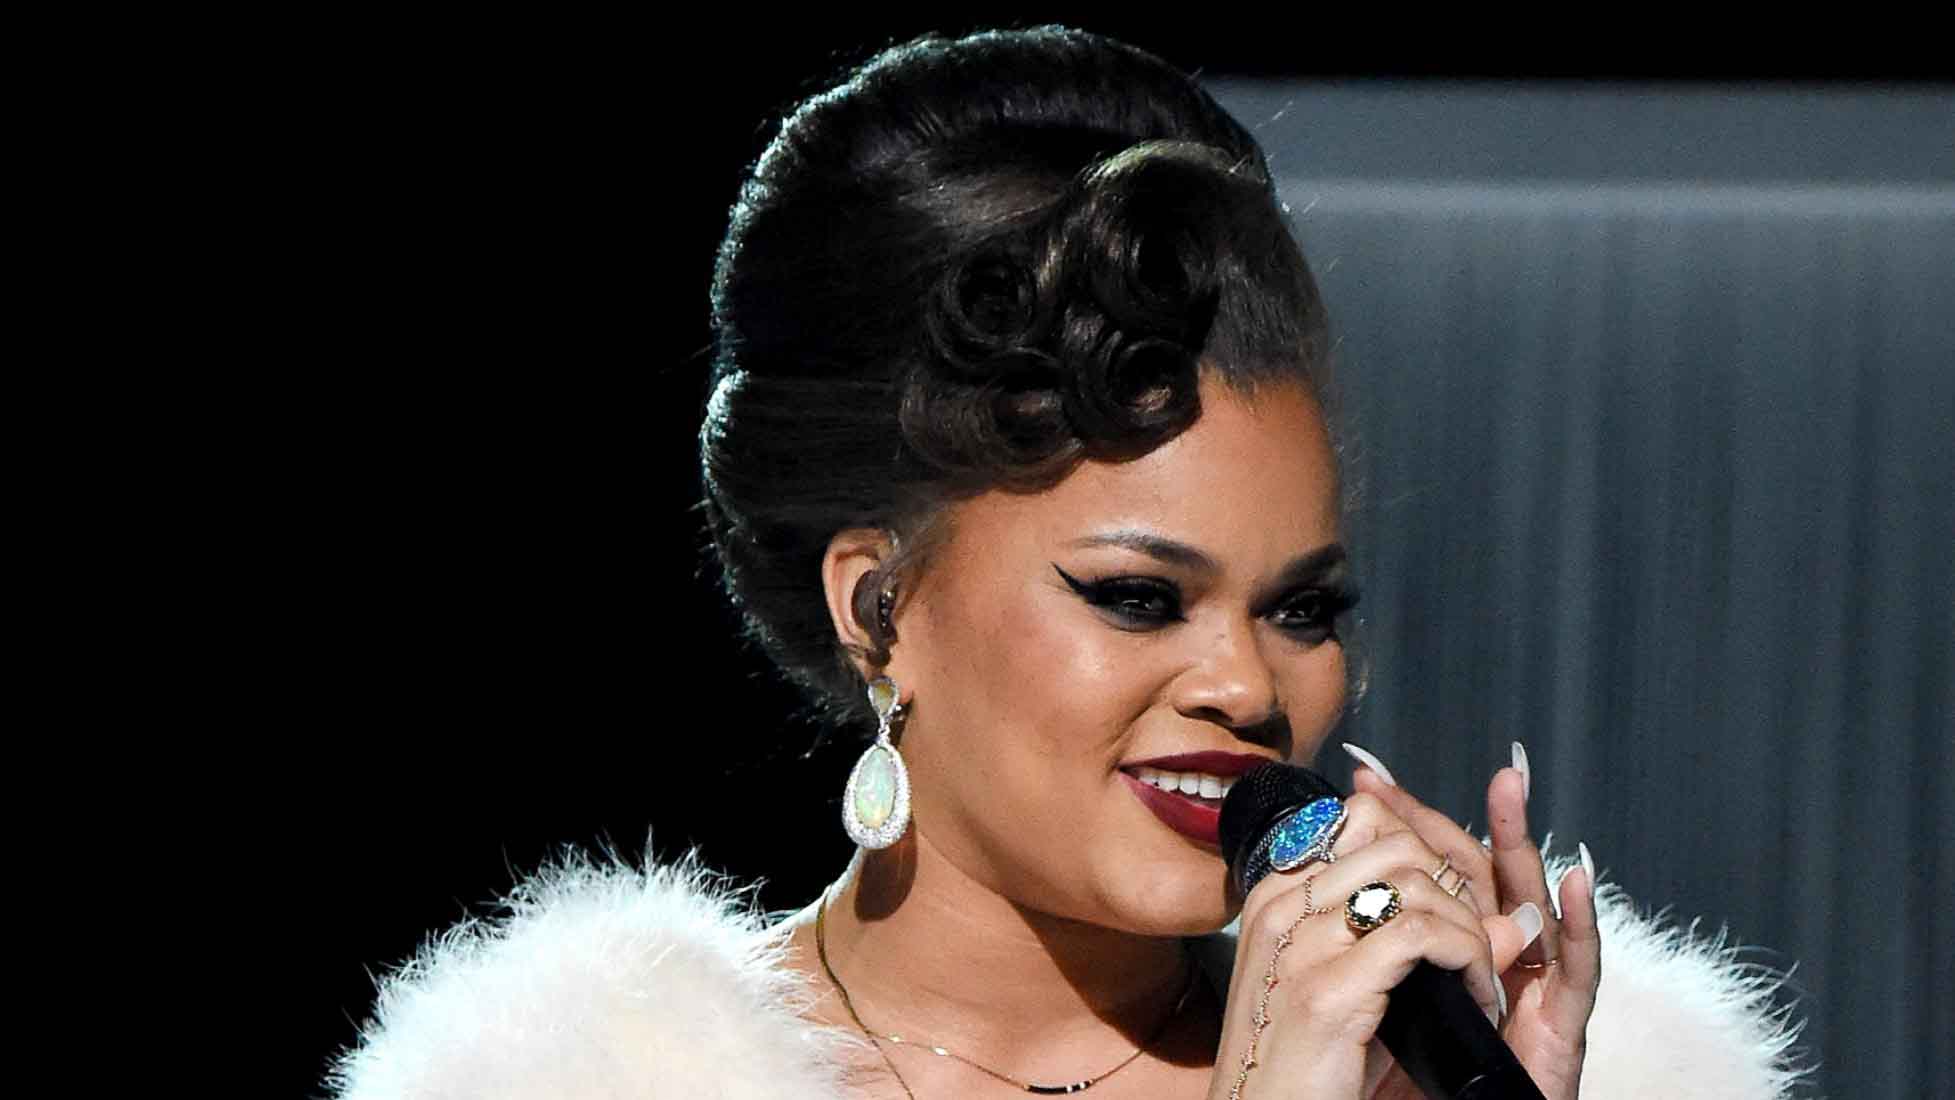 Andra Day (born Cassandra Monique Batie; December 30, 1984) is an American singer and songwriter from San Diego, California.[1] Her debut album, Cheer...